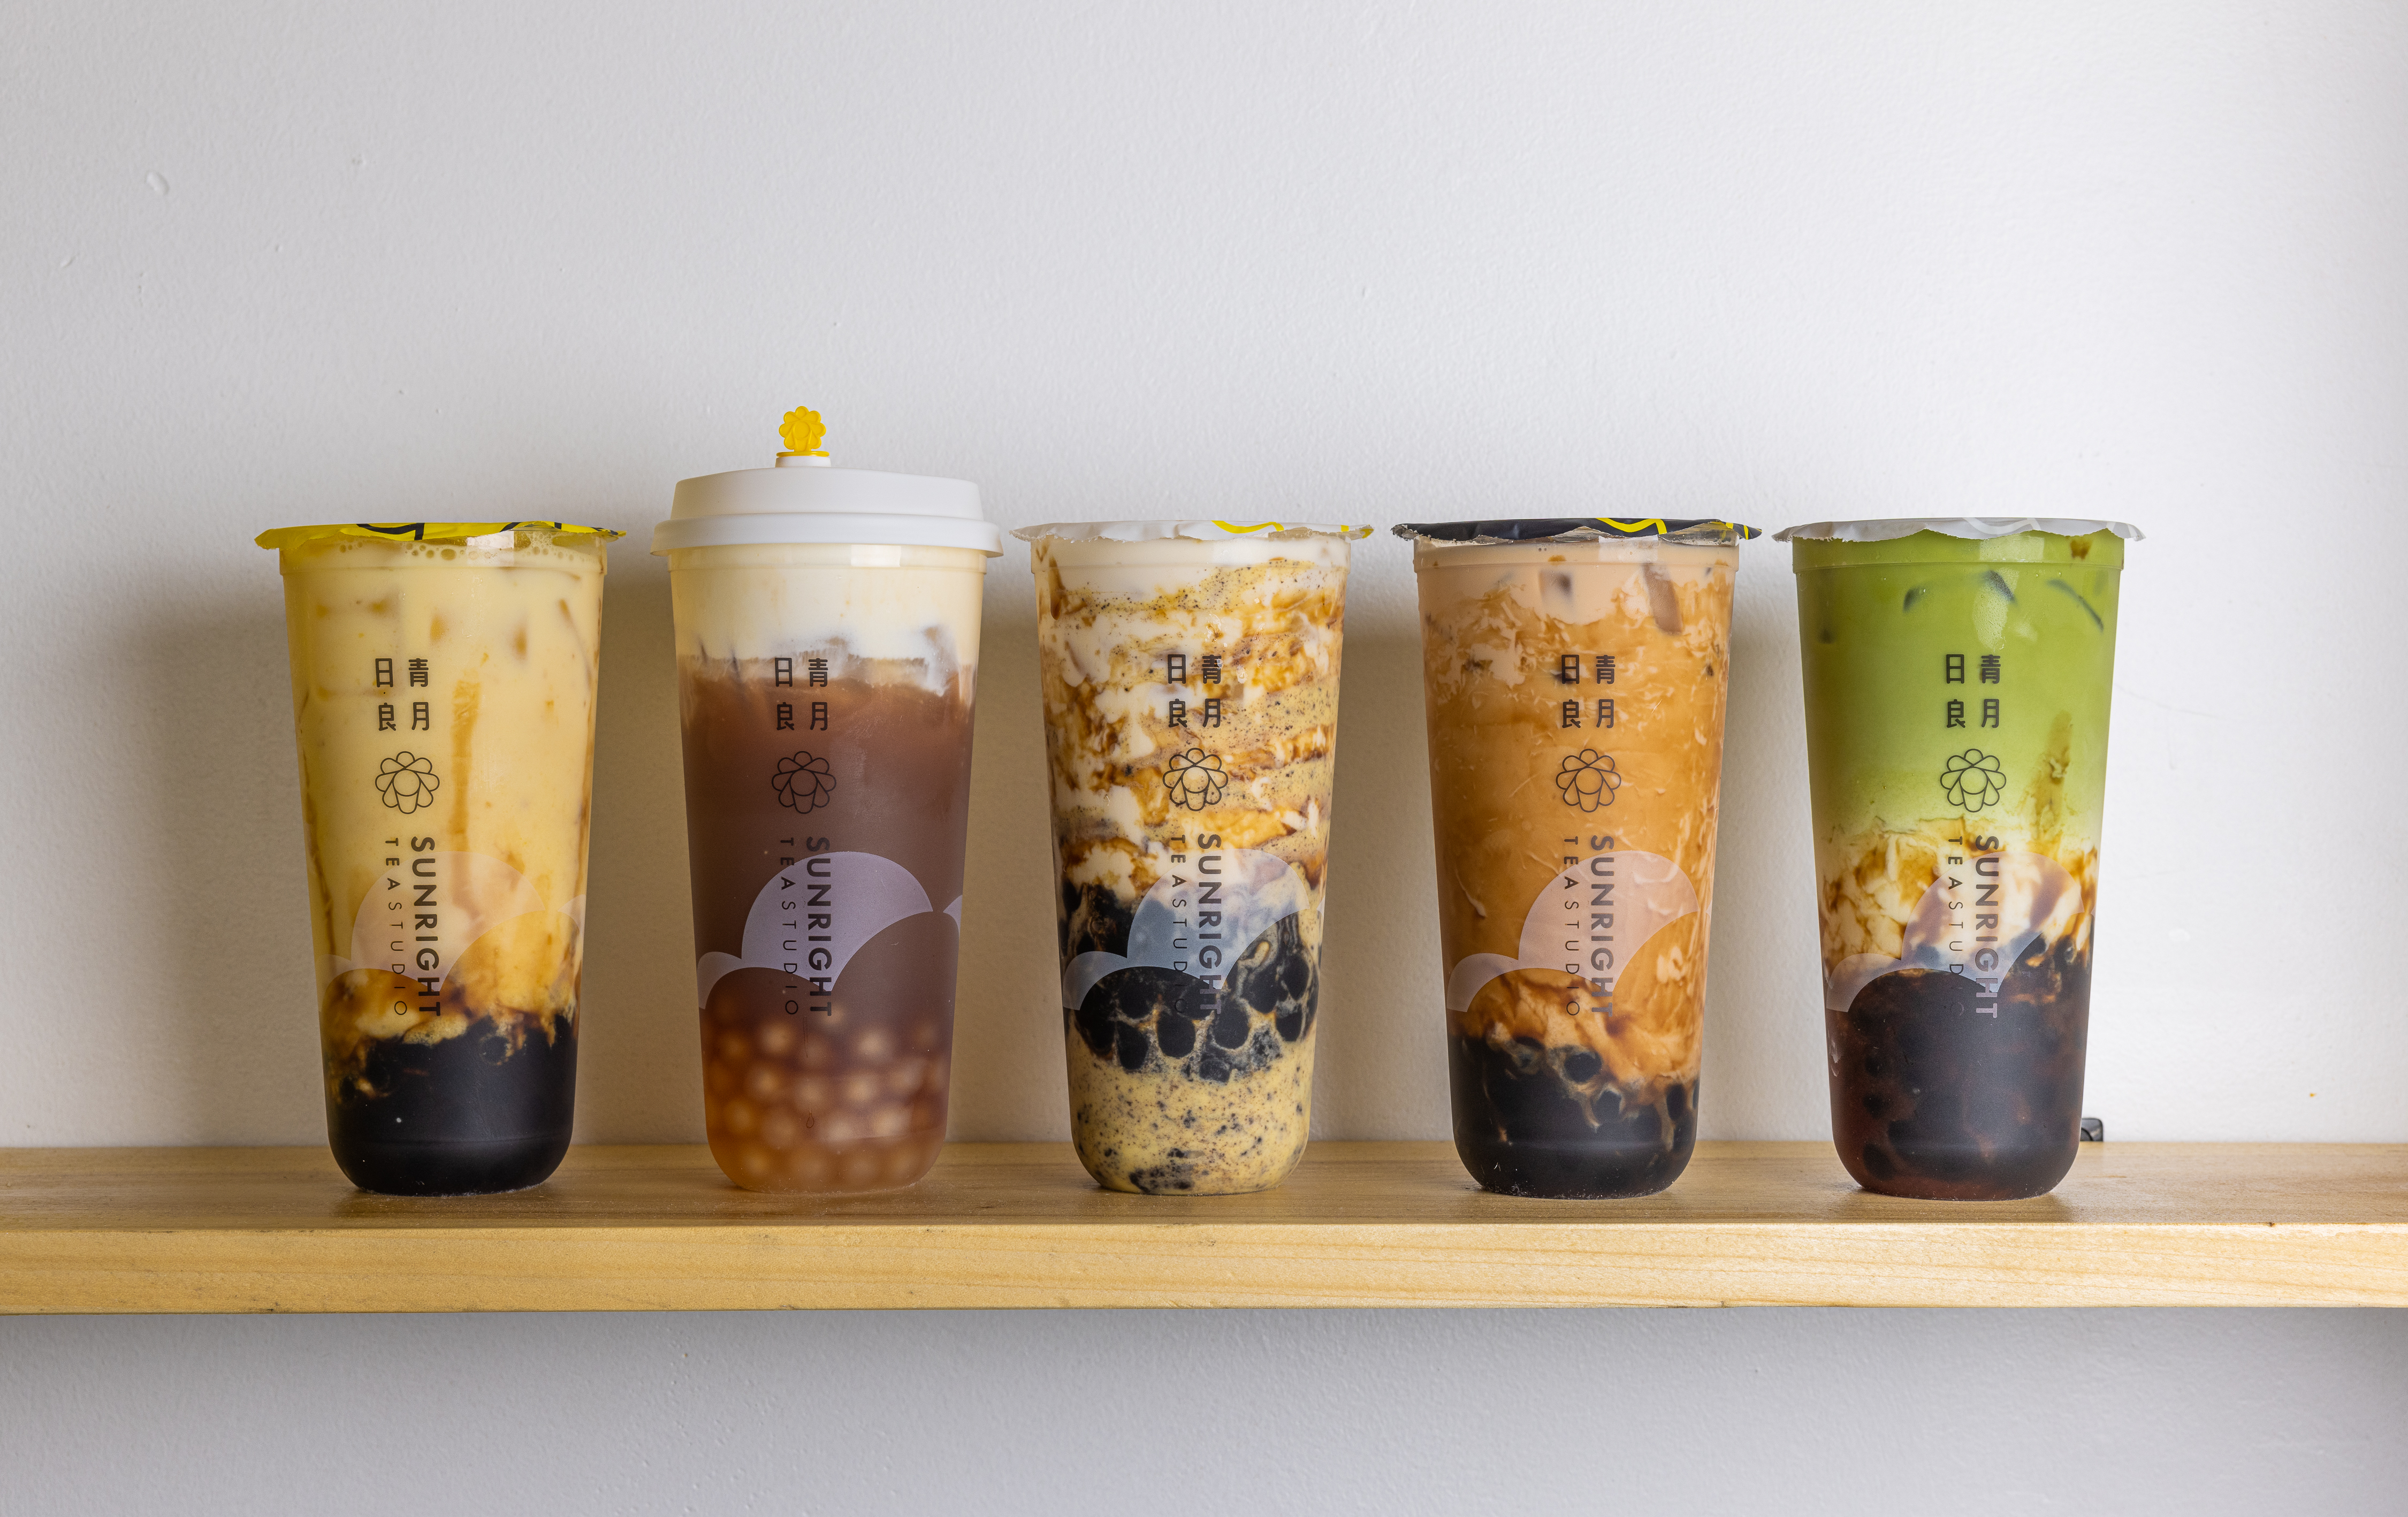 Five boba drinks with various mix-ins and toppings, ranging from green to creamy.